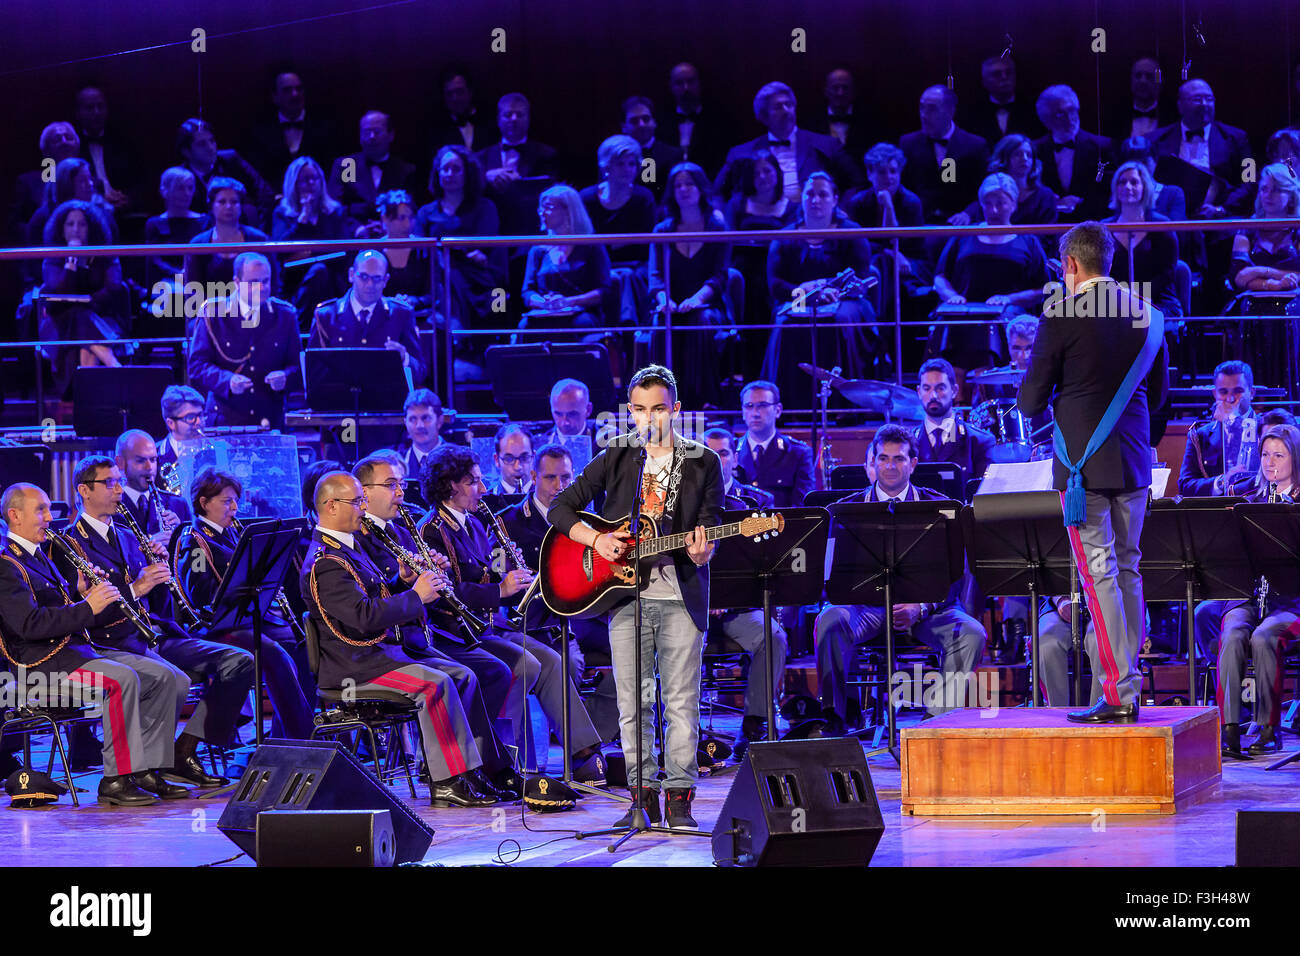 Rome, Italy - May 6, 2015: Lorenzo Fragola, sings in the concert of the Band of the State Police. Stock Photo